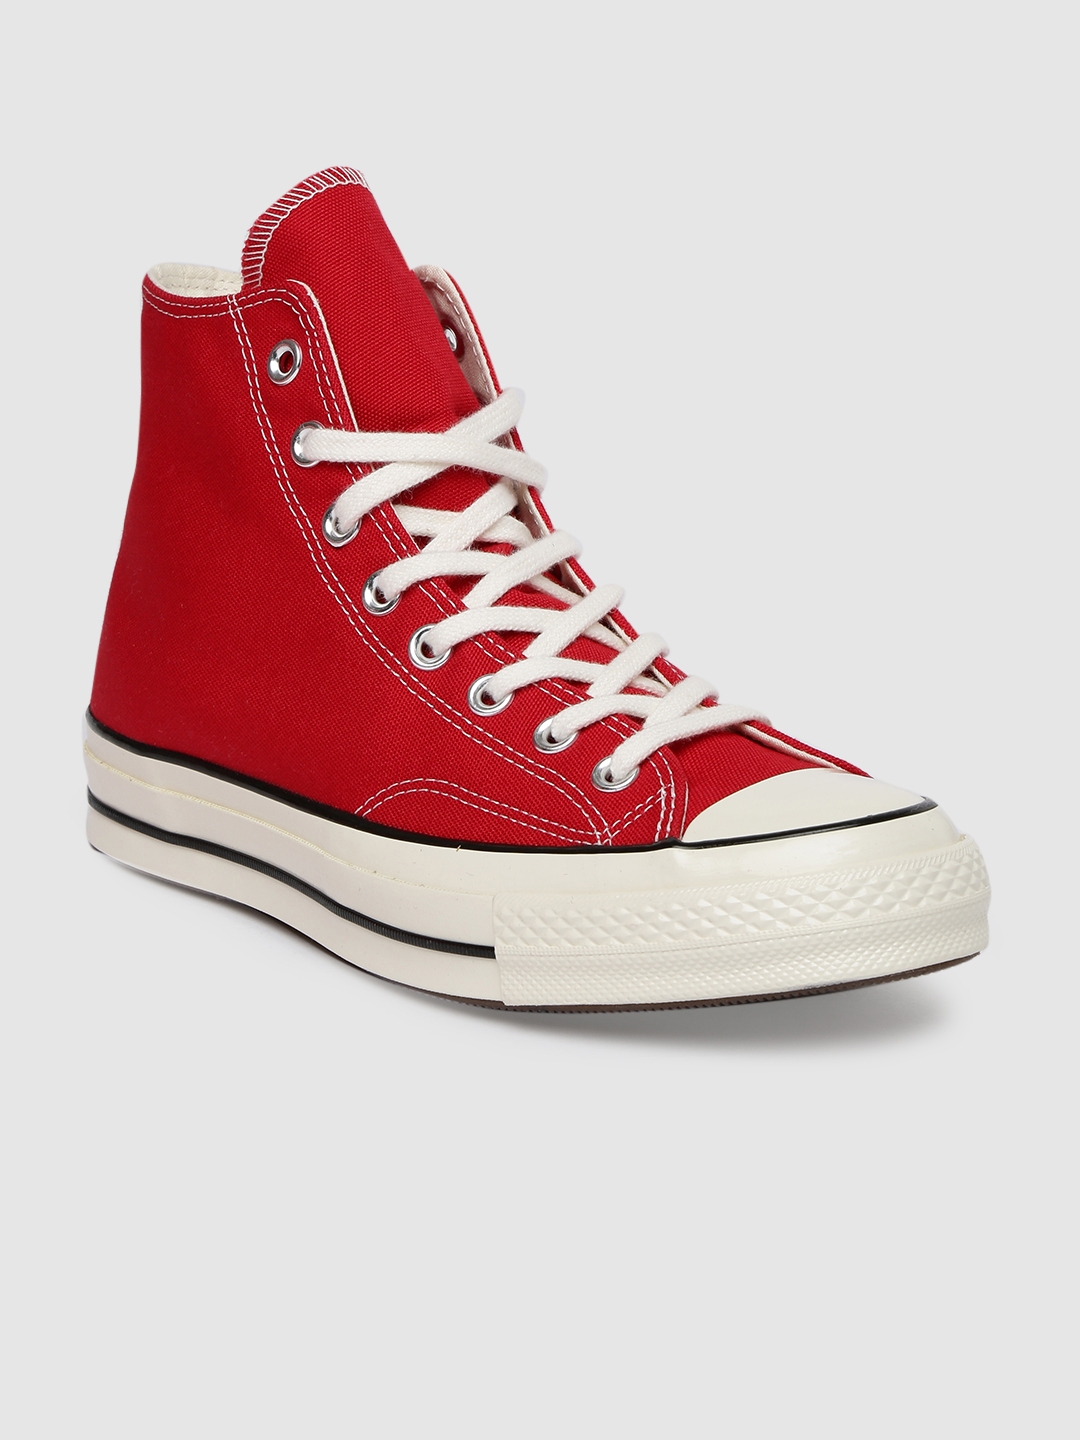 solid red converse